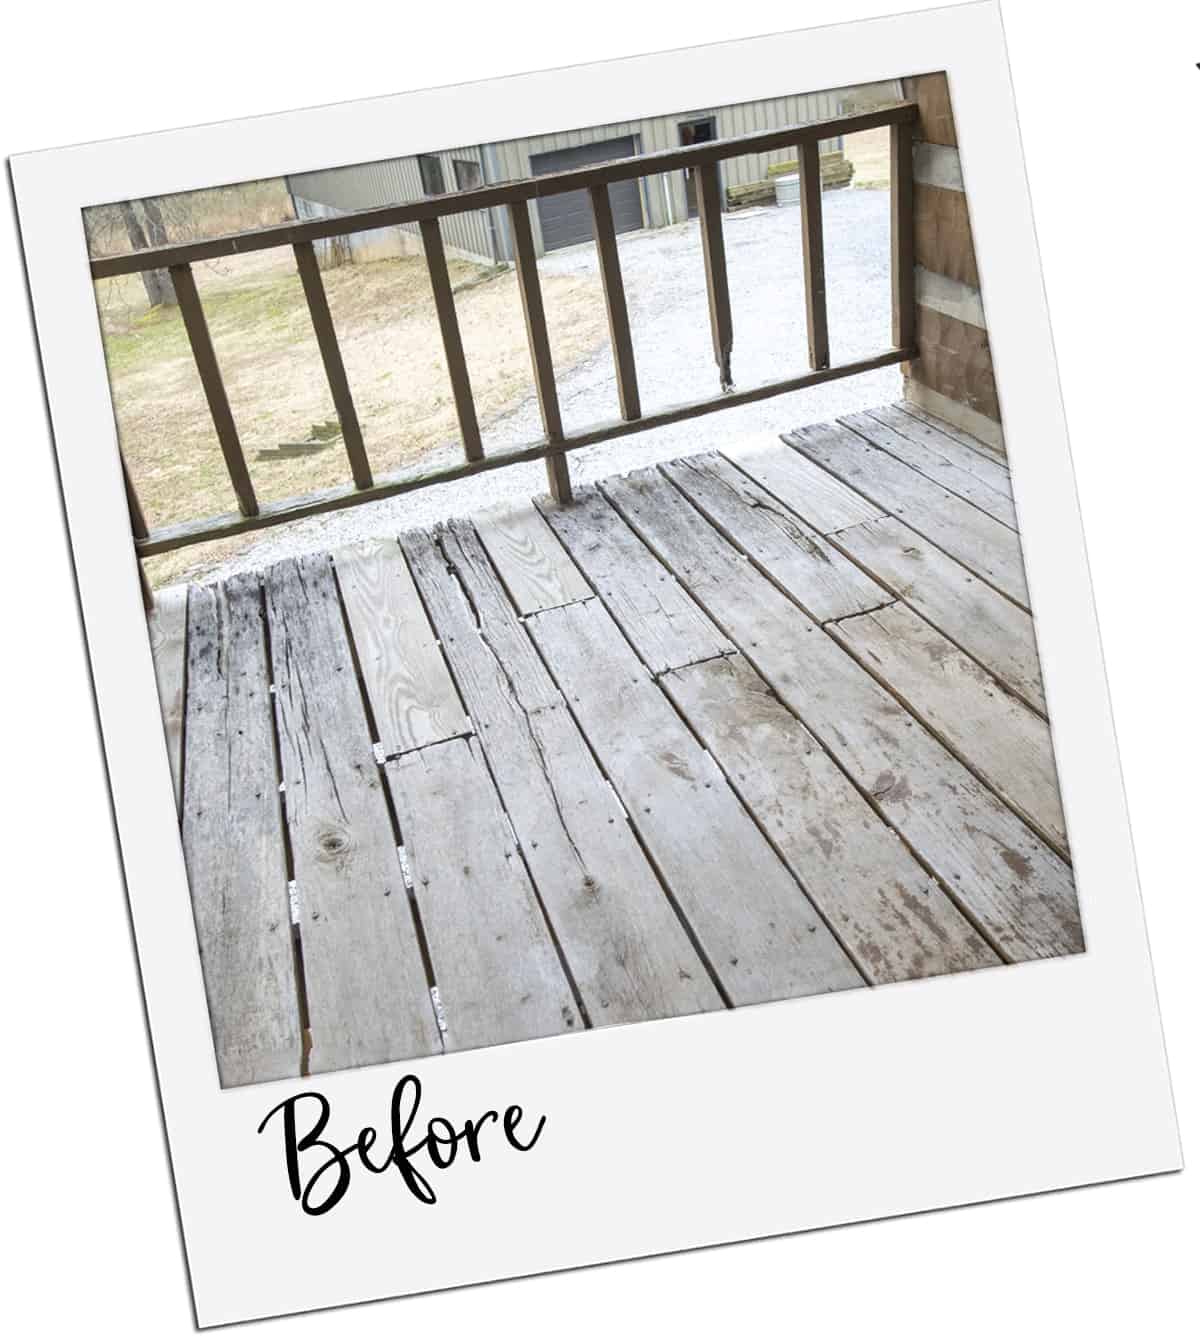 Polaroid frame of a rotted and cracked deck before replacing and staining.